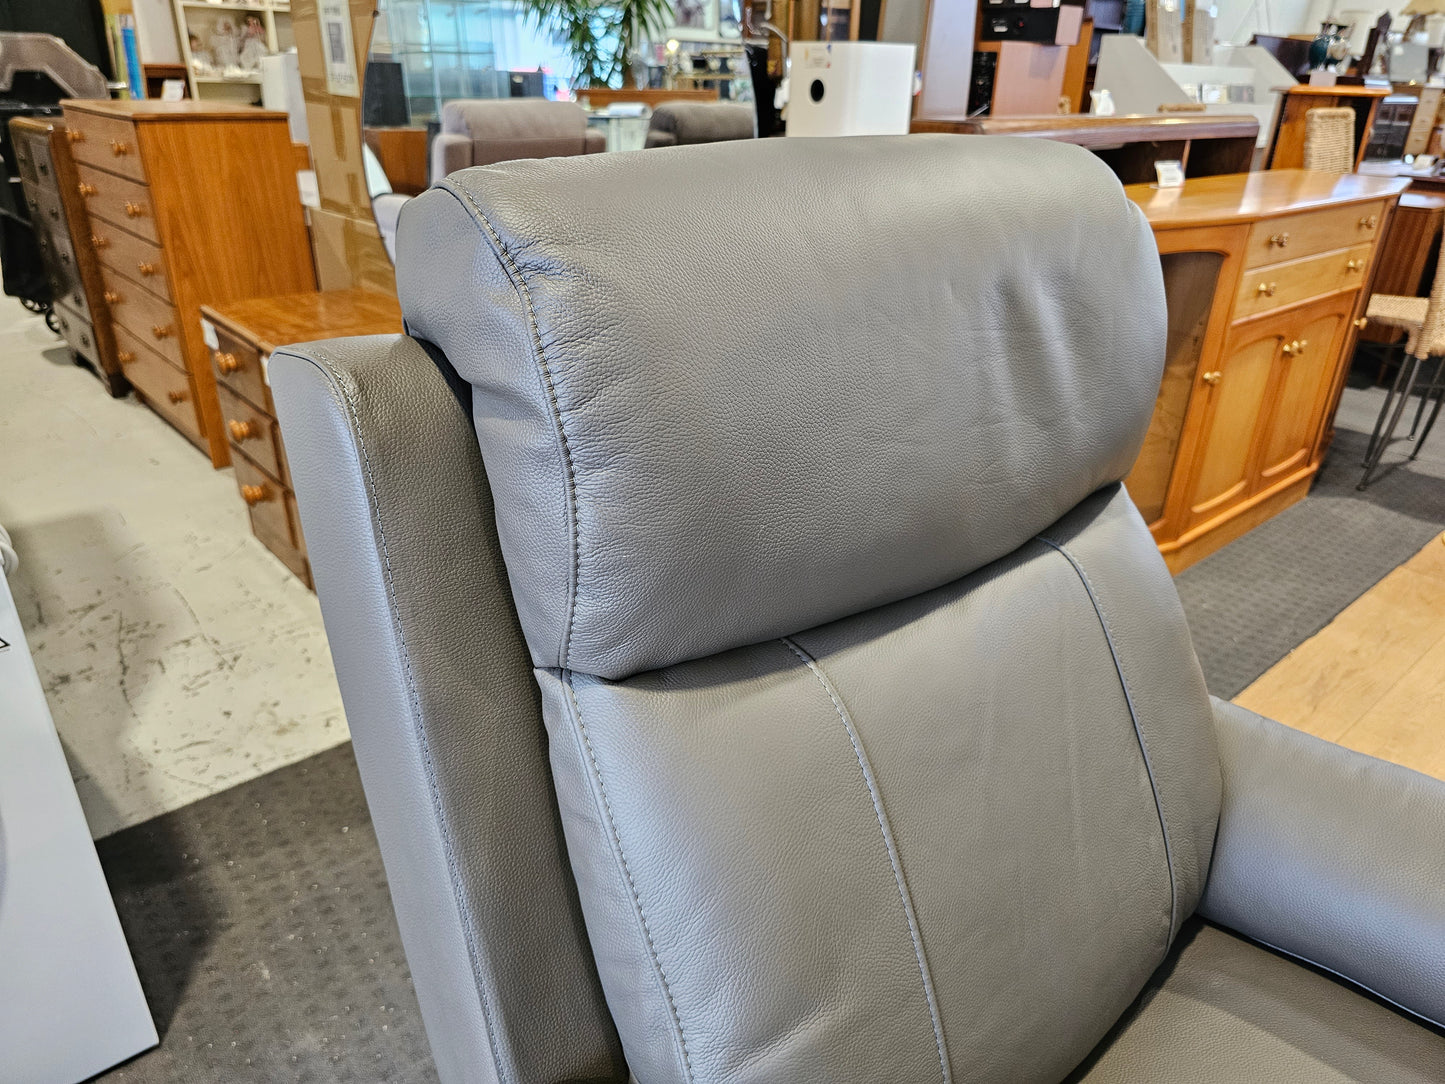 TACOMA Leather Lift Chair - Grey